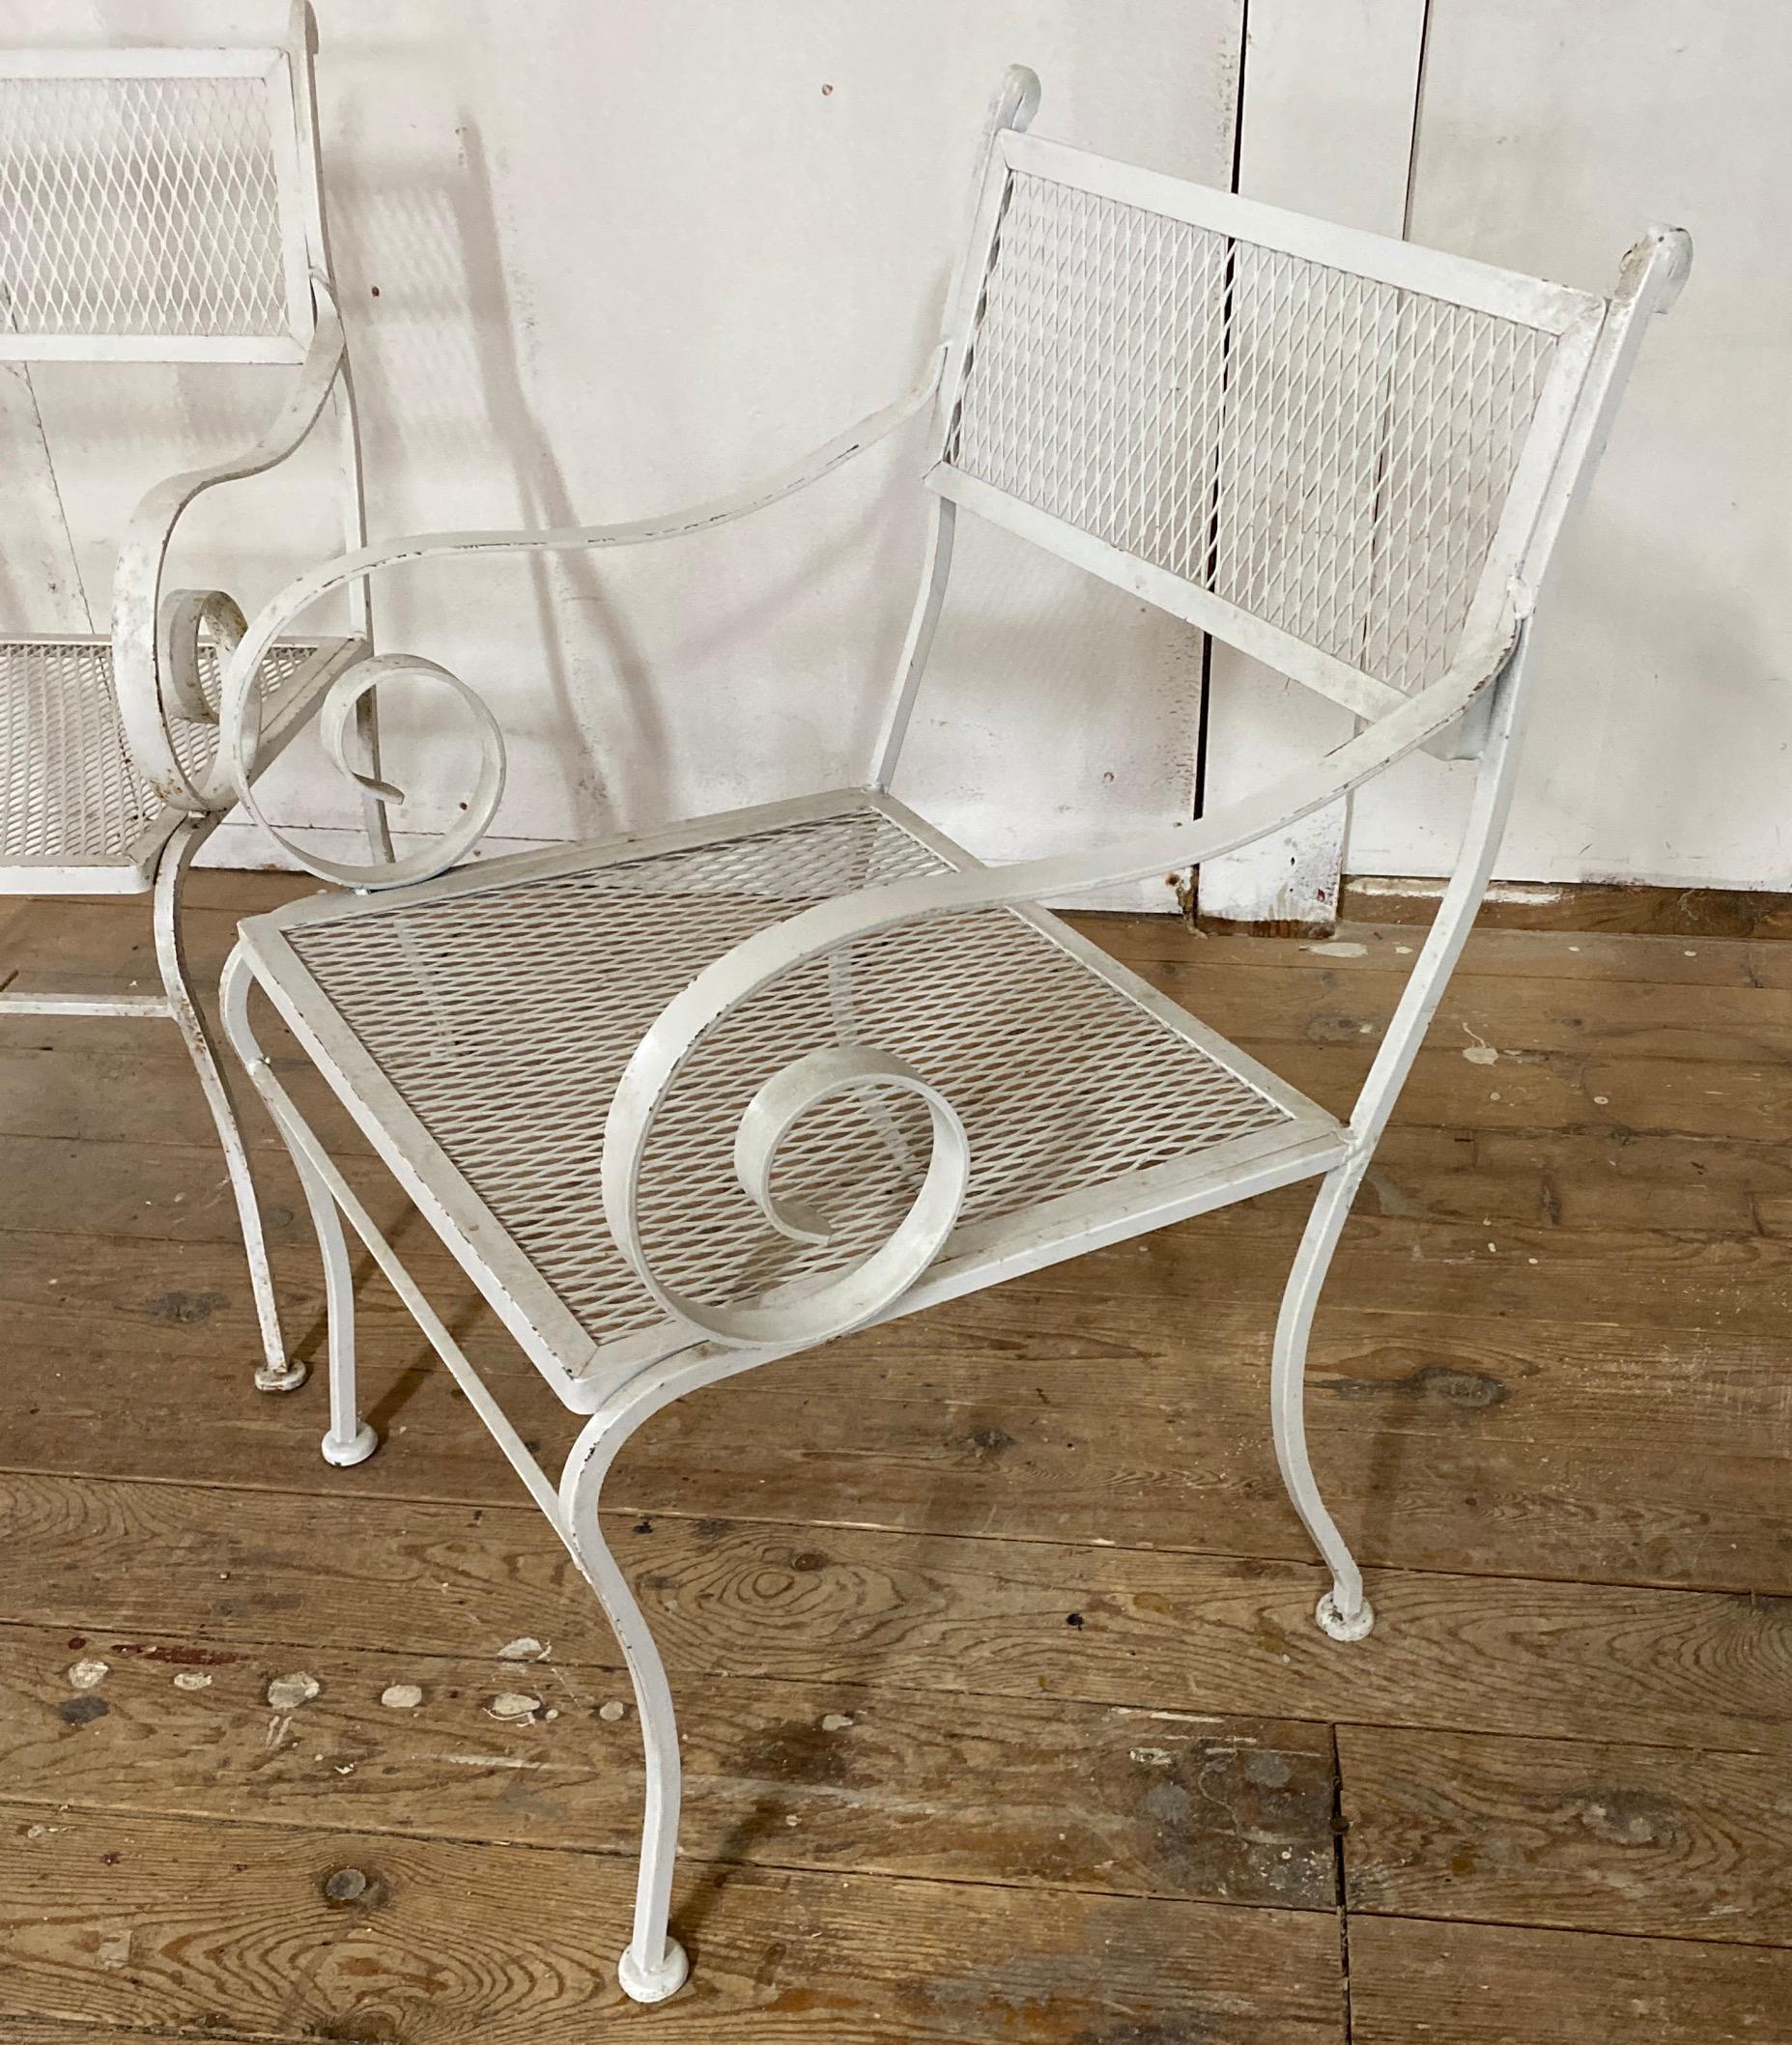 Set of 4 Mesh Metal Garden Arm Chairs for Dining or Lounging In Good Condition For Sale In Sheffield, MA